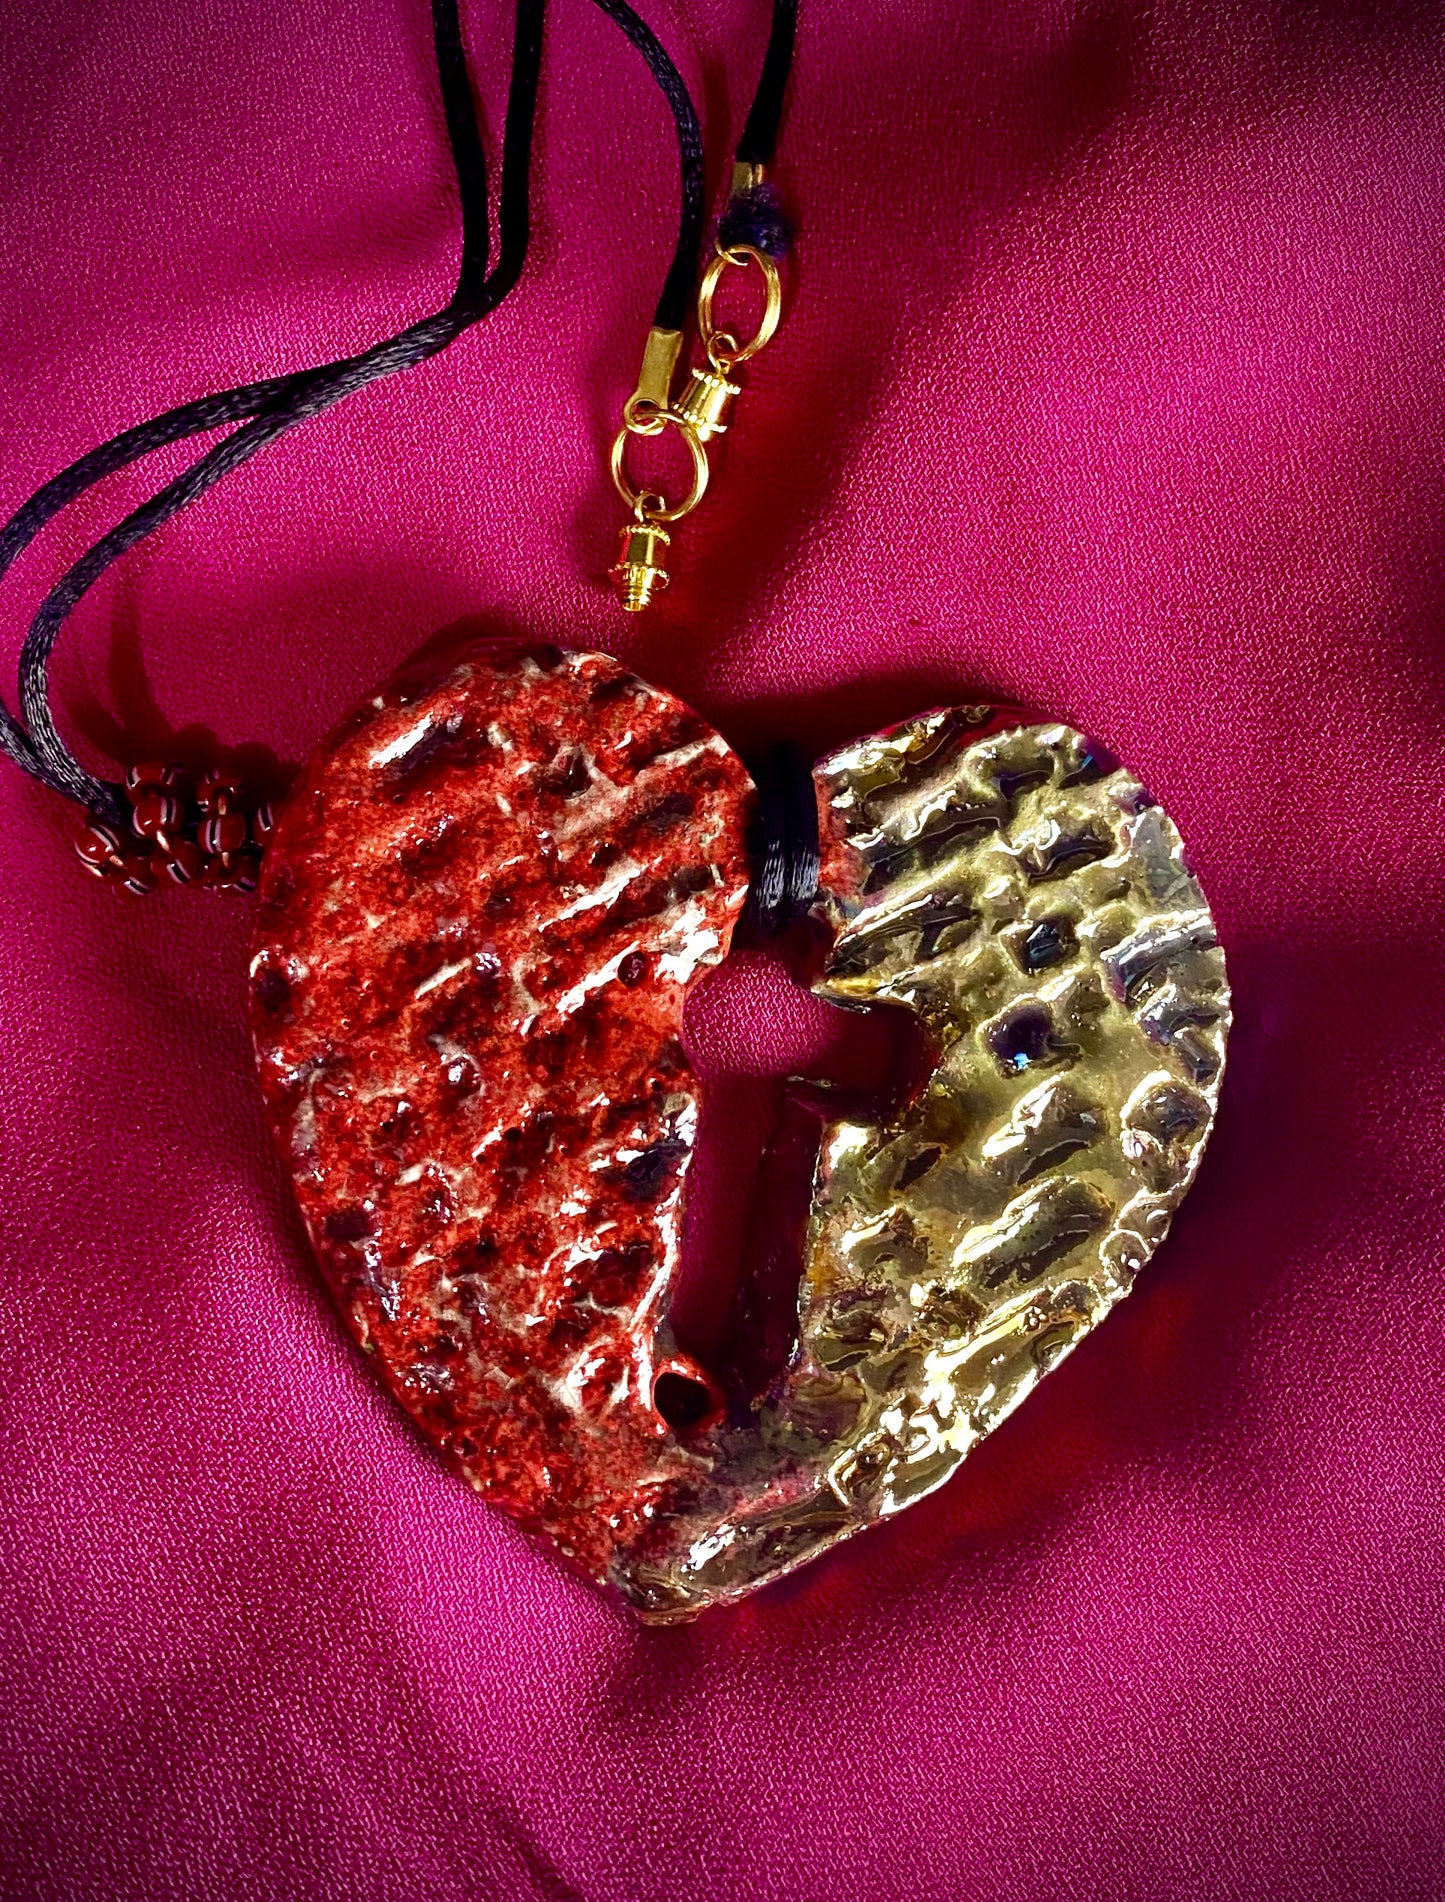 Have A Heart ! Each heart pendant is handmade with love! It is 3"x 3" and weighs approx. 3ozs. This pendant has a  ruby red and gold metallic raku glazes that renders a unique translucent  patina. The heart  has a textured  pattern with a cut out cross in the center.. It holds a spiral of ruby red mini beads on a spiral copper wire. This pendant has a nice 12" black suede cord!